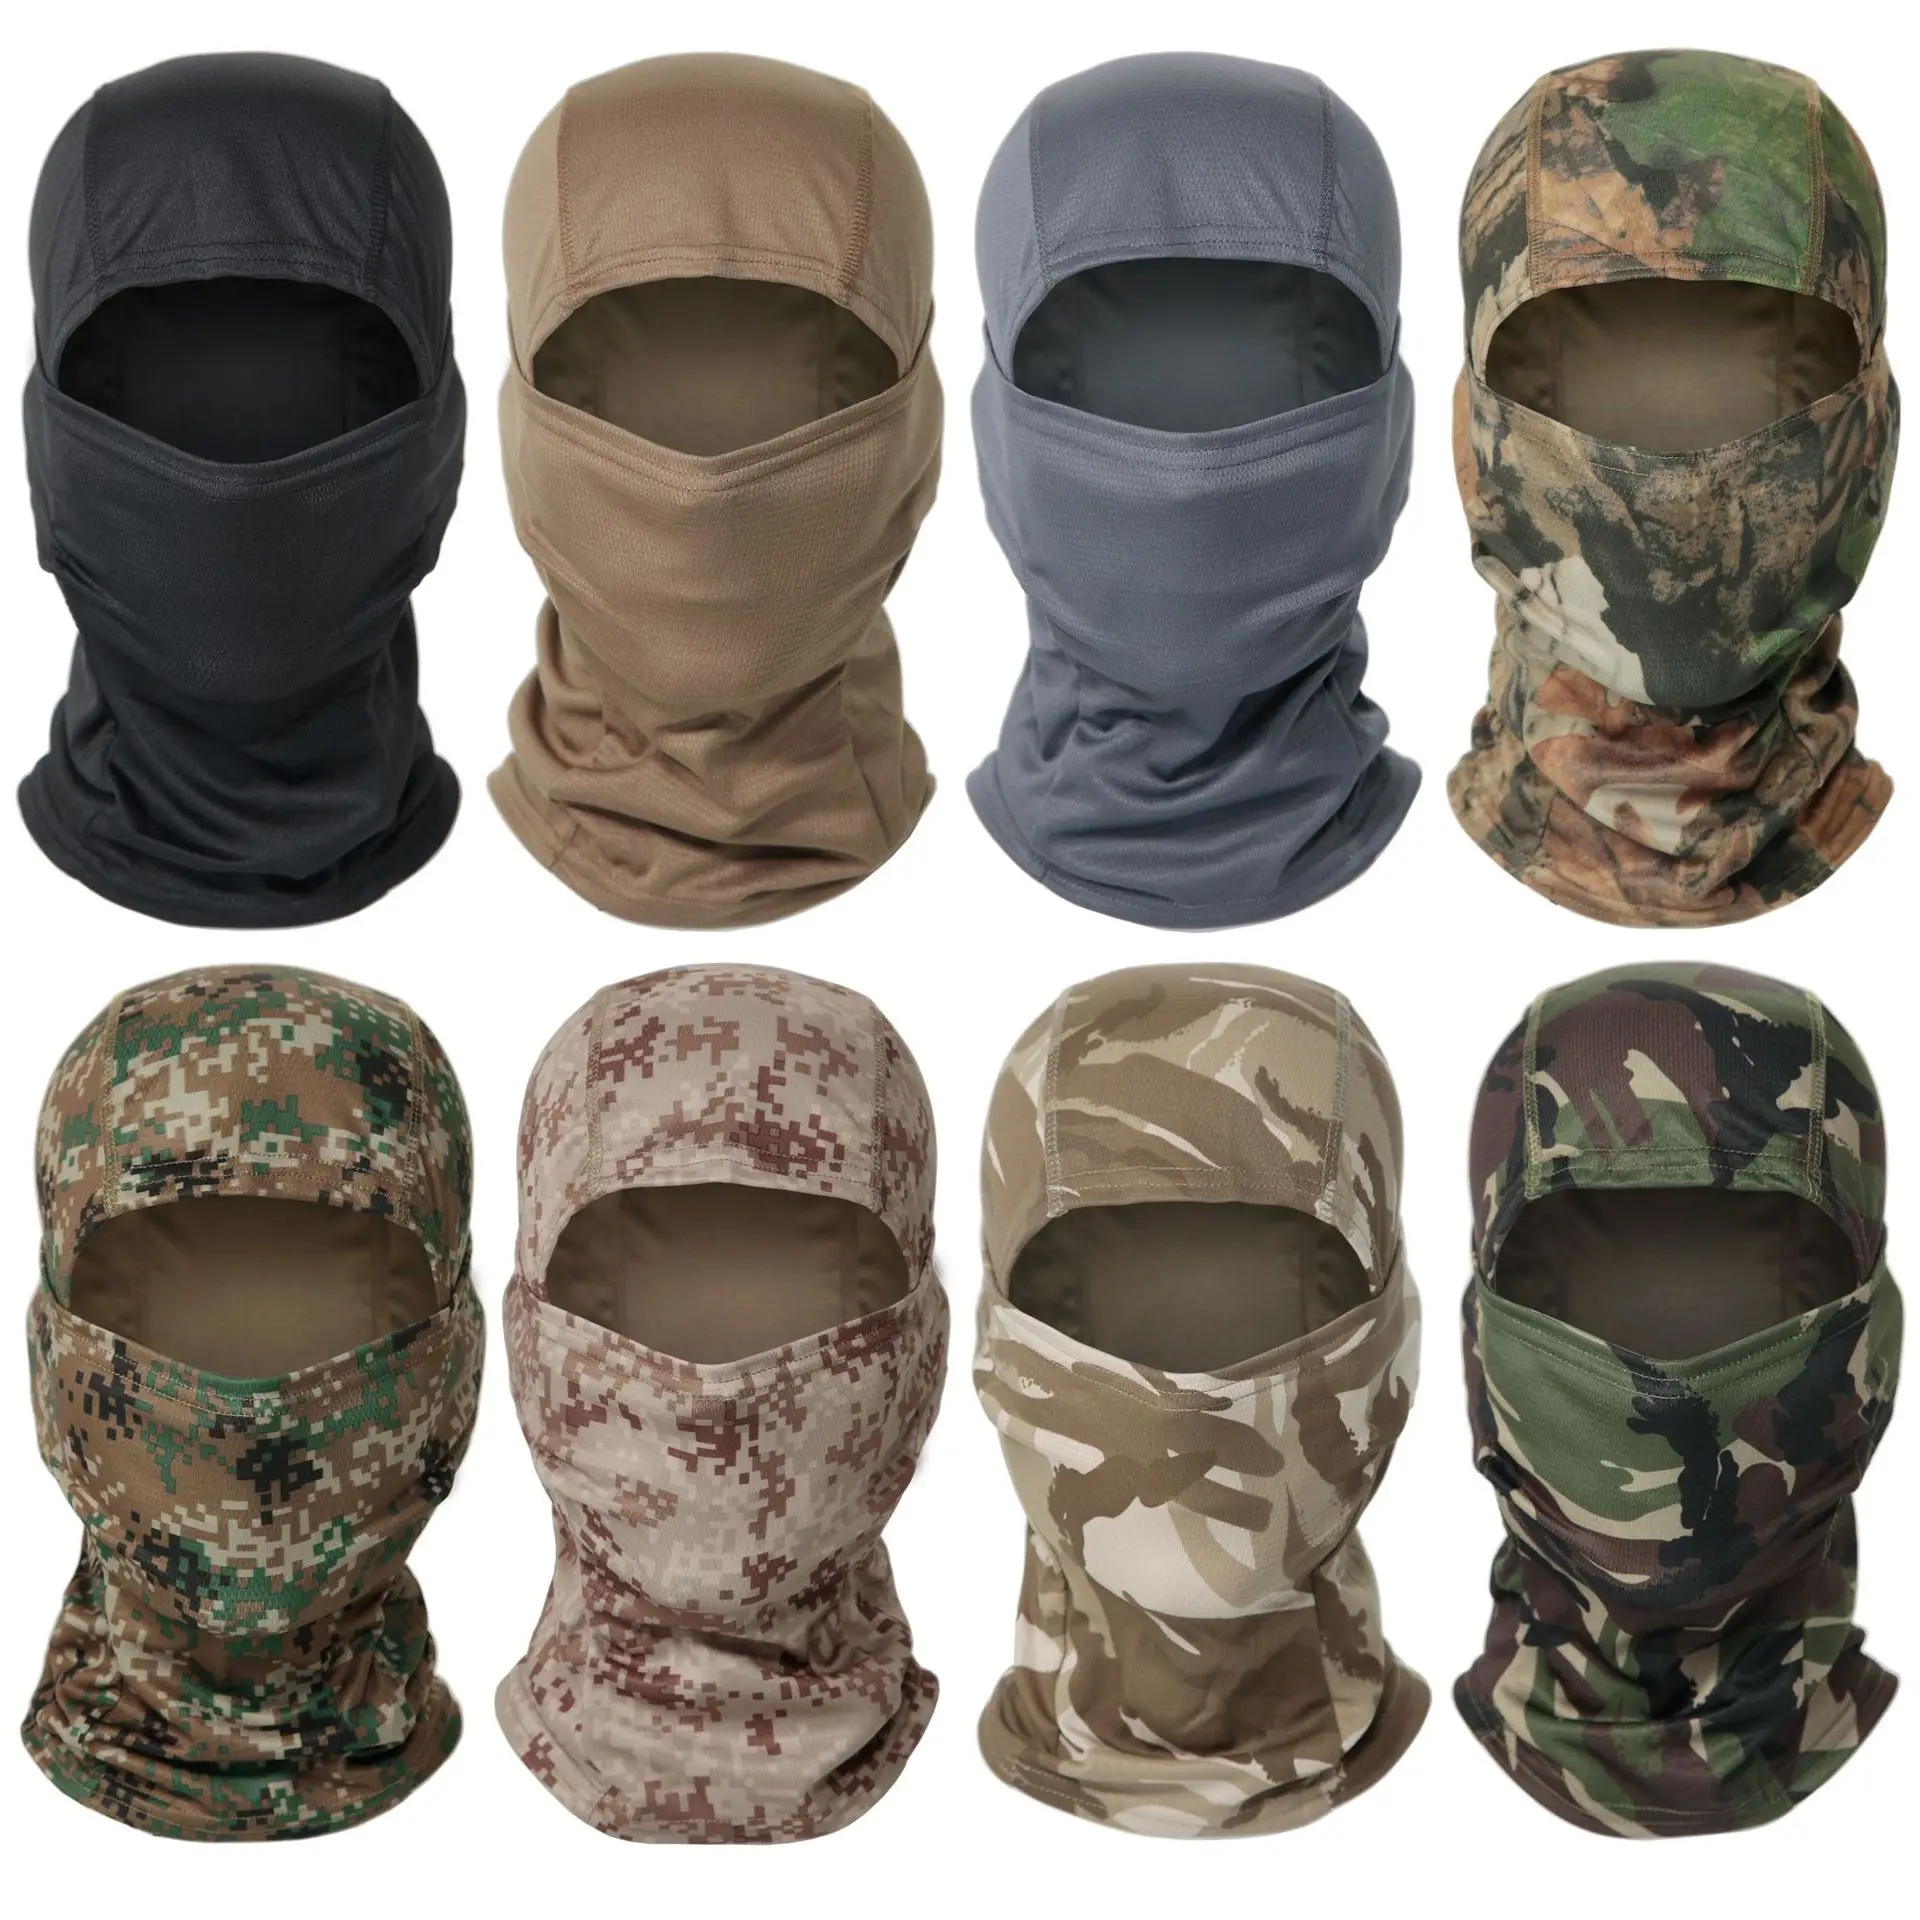 Tactical camouflage balaclava full face mask cs wargame army hunting cycling sports helmet liner cap military multicam cp scarf